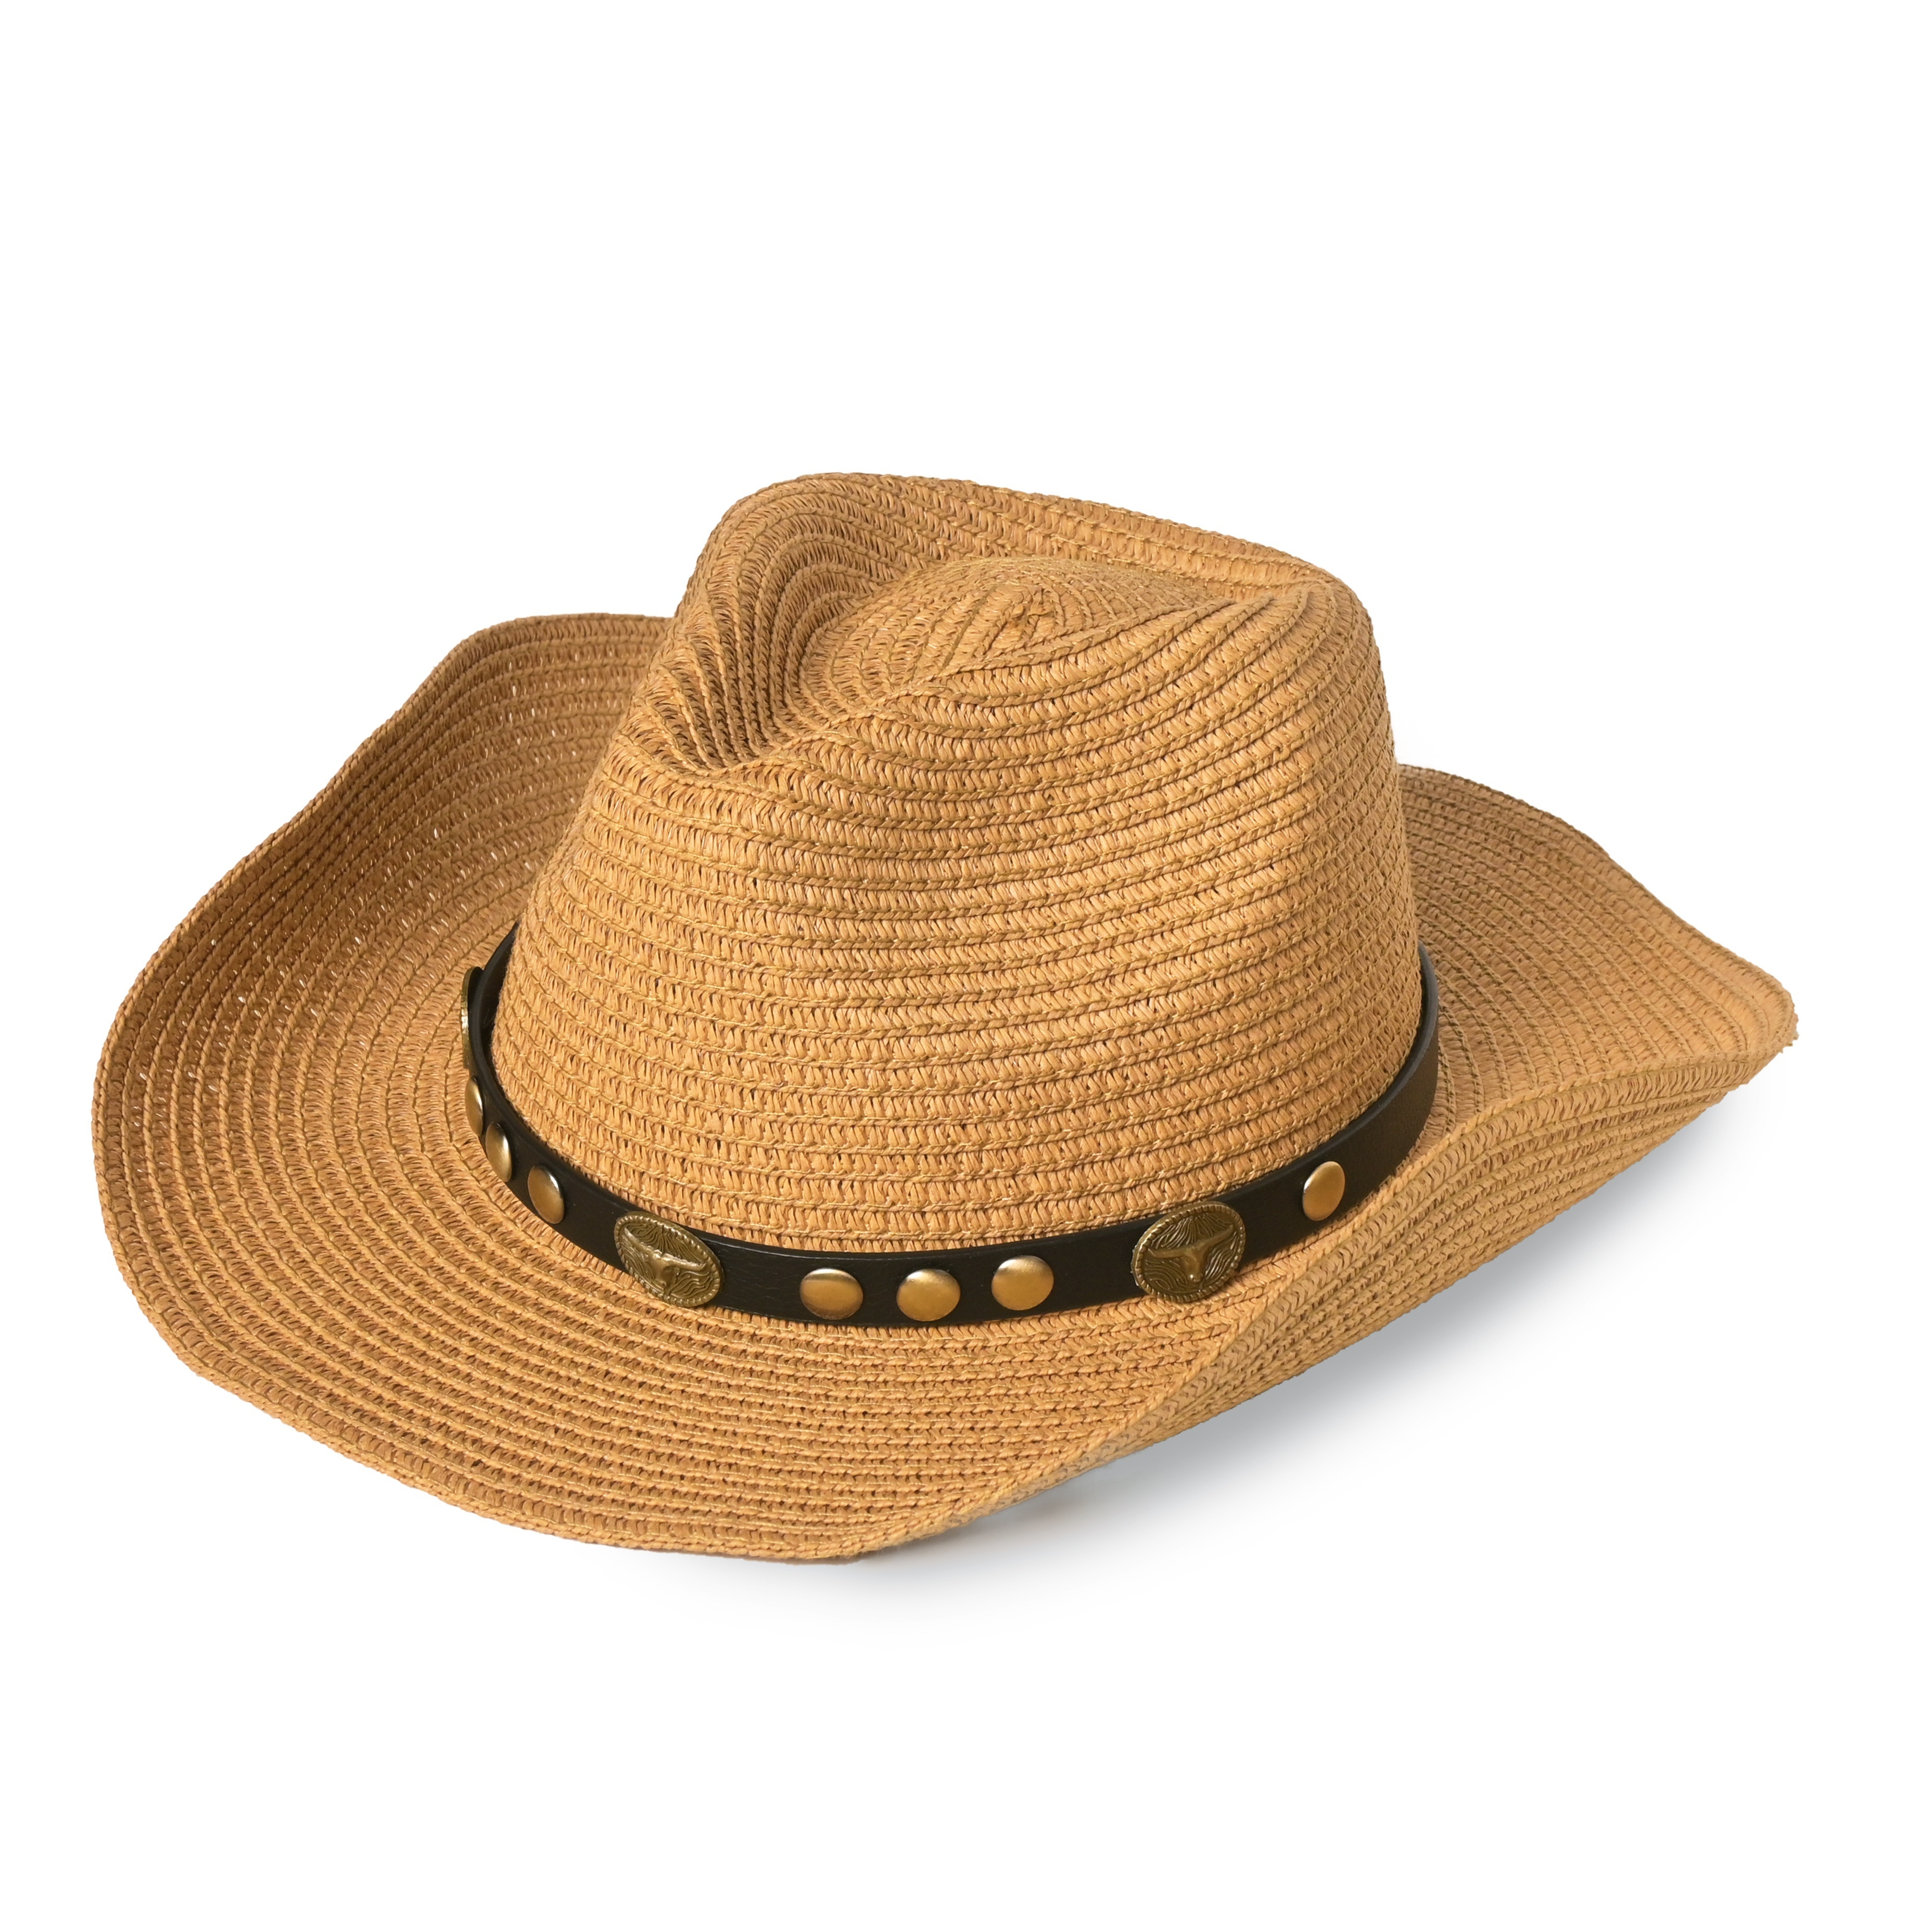 8 Pcs Straw Hats for Men Women's Cowboy Race Day Panama Hat Plaid Sun  Protection Jazz Hats Summer Beach Short Brimmed Mesh Hats for Men Women  Traveling Fishing, 8 Colors at